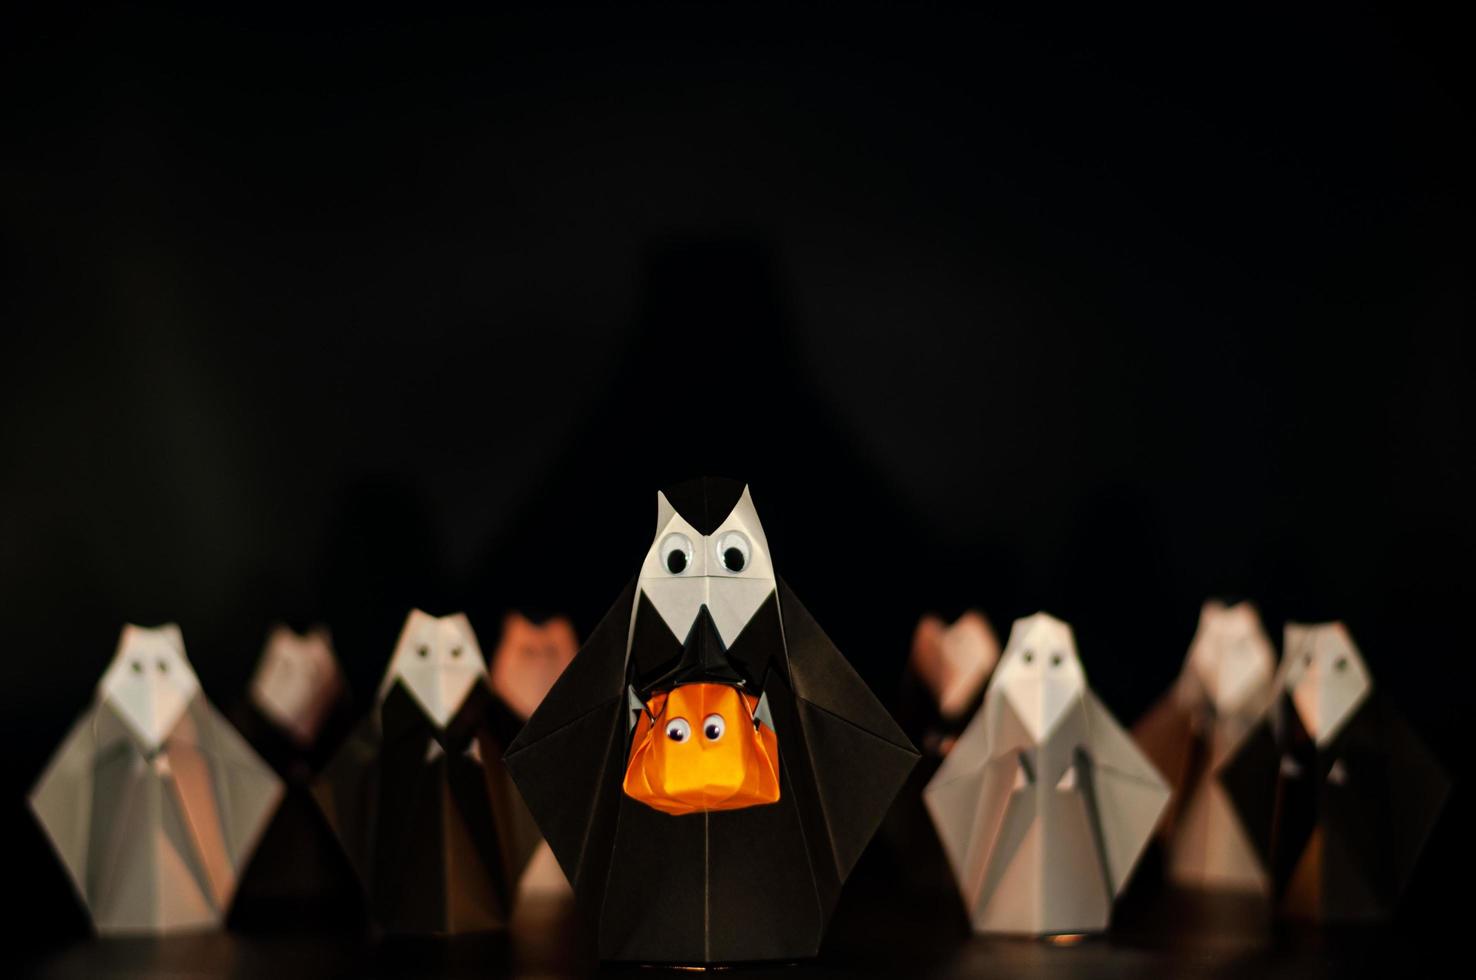 The Halloween origami or Paper folding Nun holding pumpkin head jack o lantern made from folded paper with many nuns at the background. photo